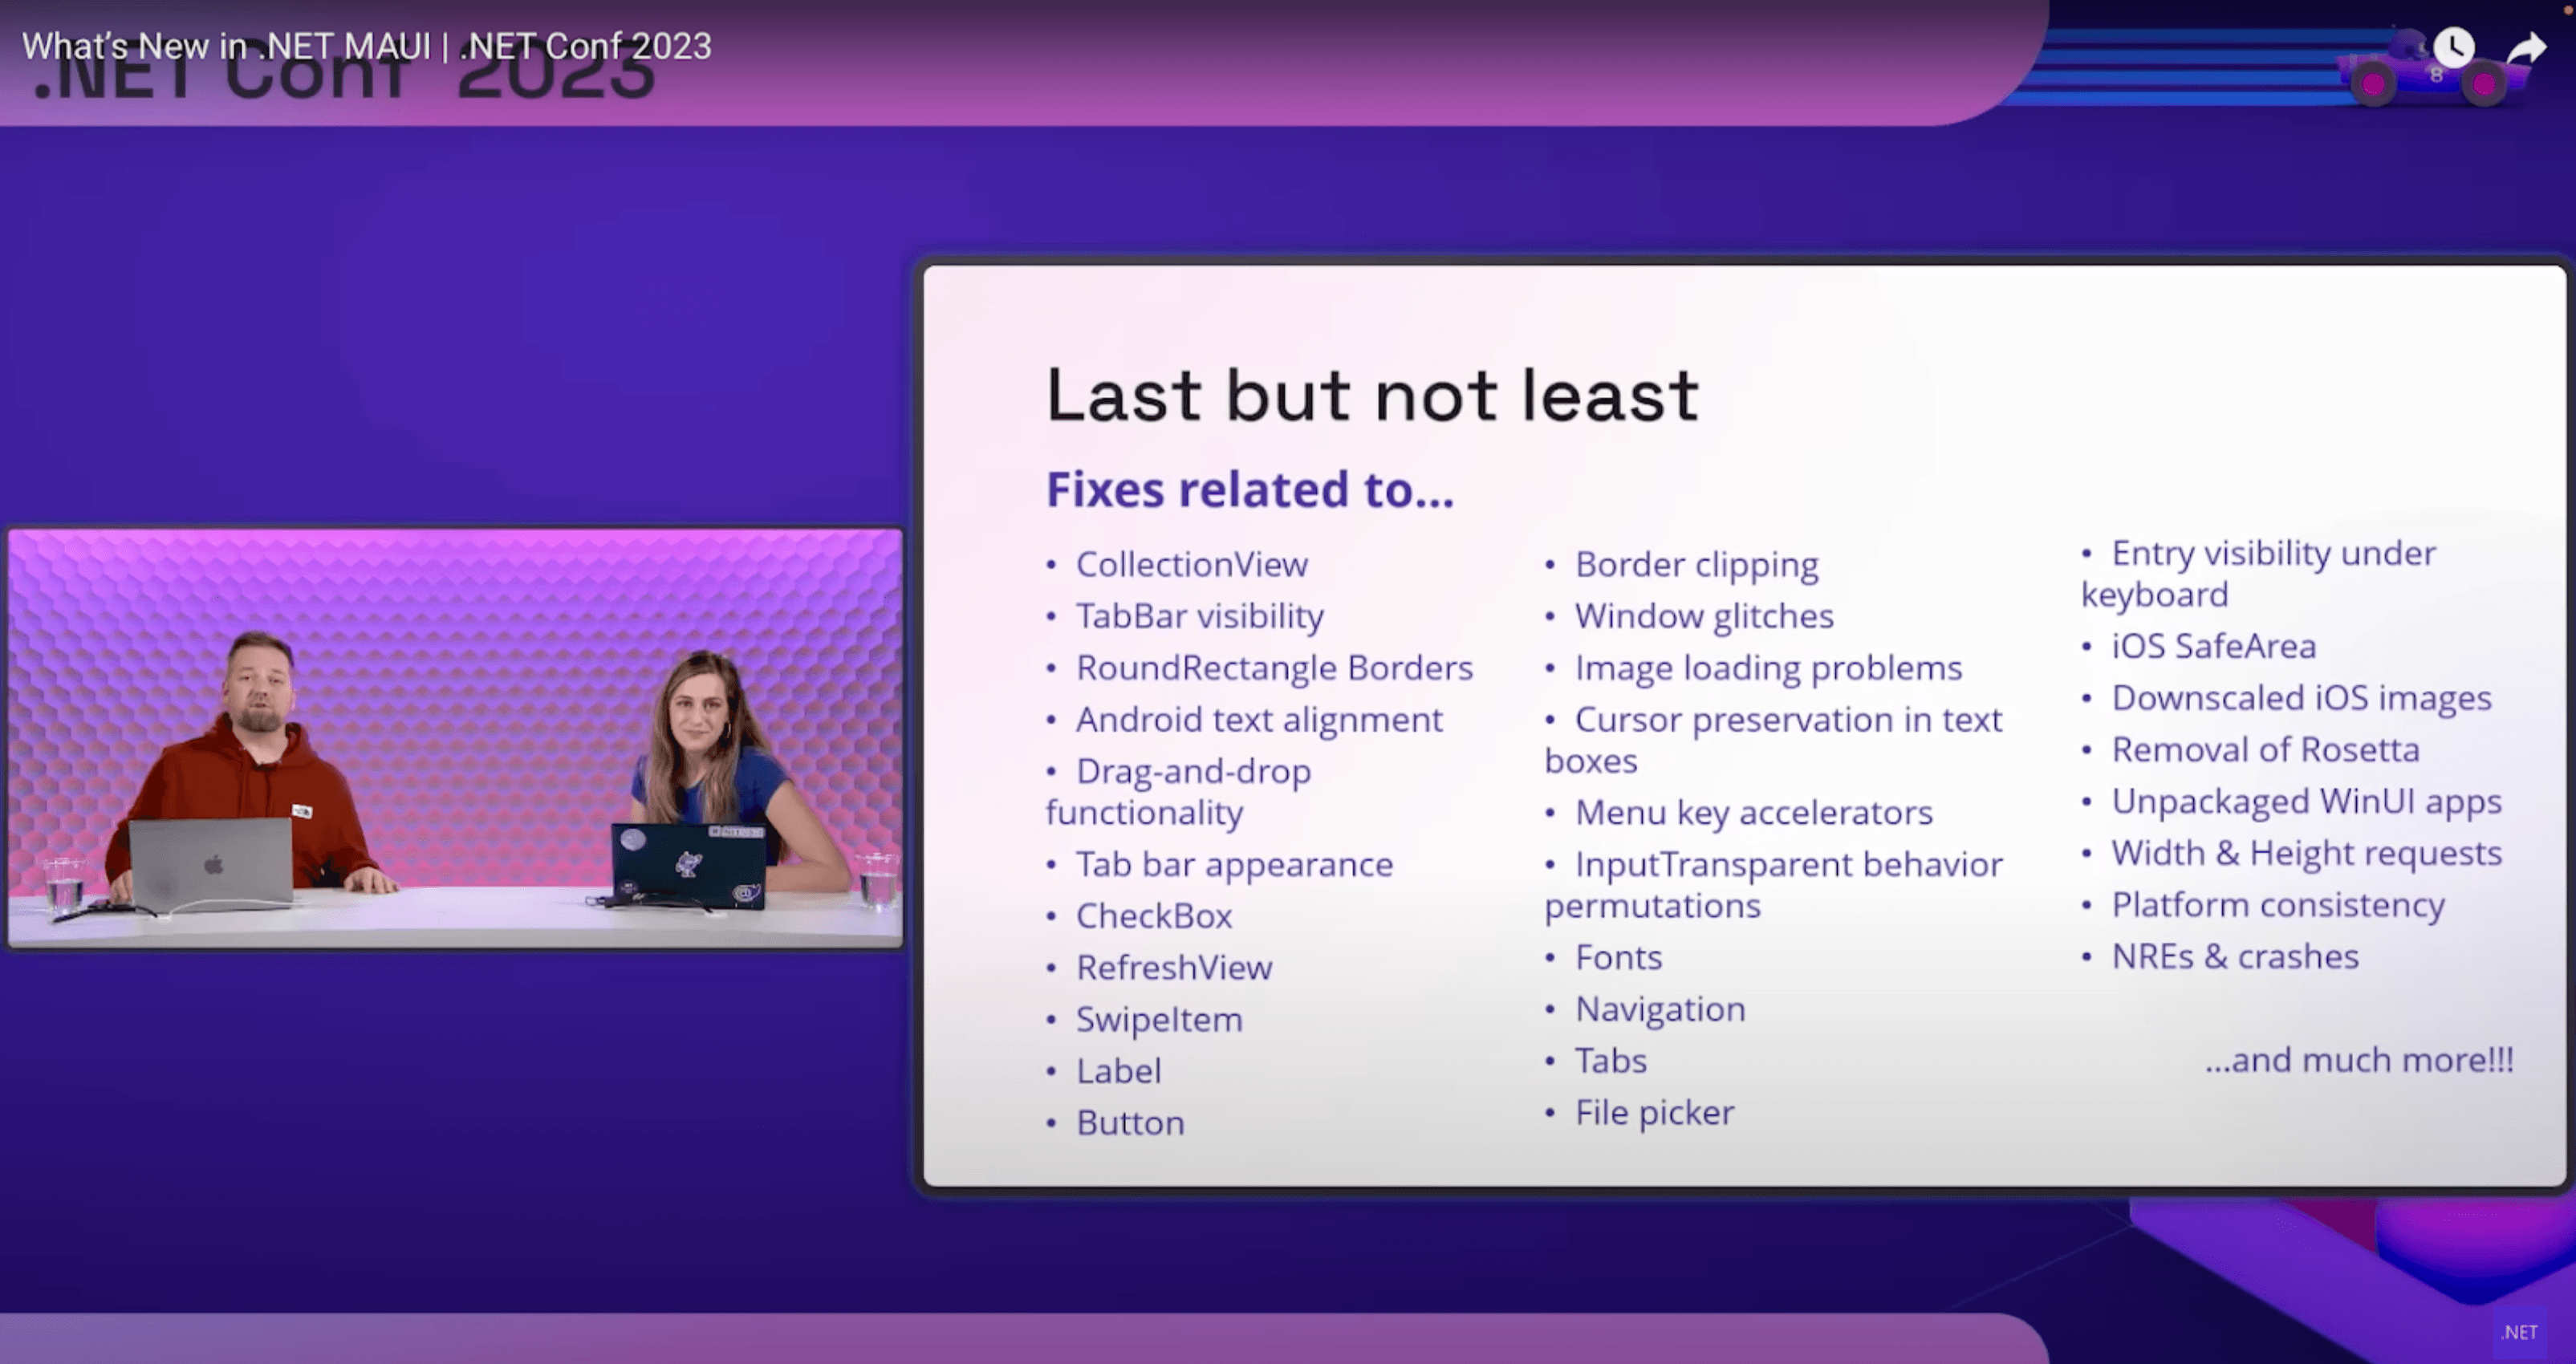 Last but not least slide references fixes related to (more than 20 topics)